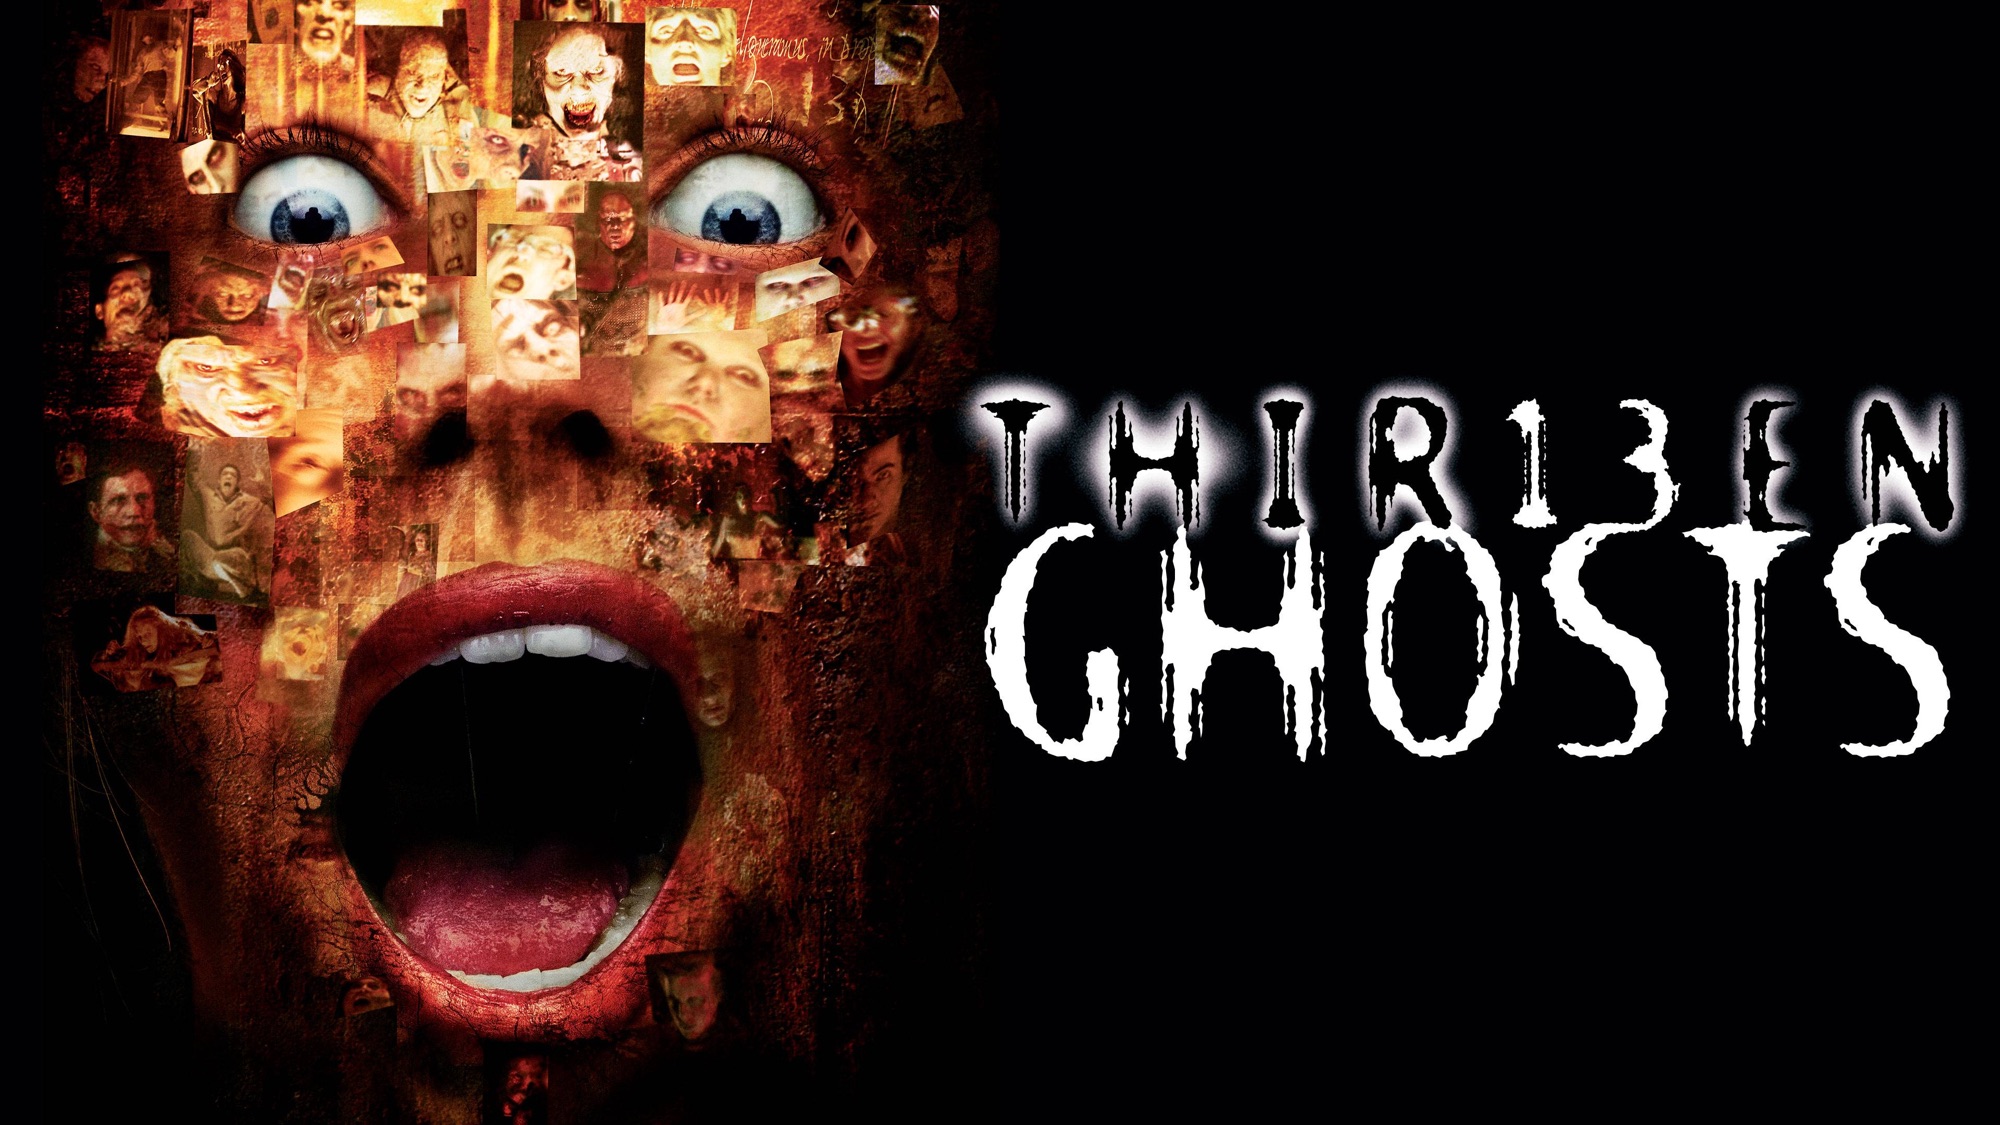 13 ghosts home